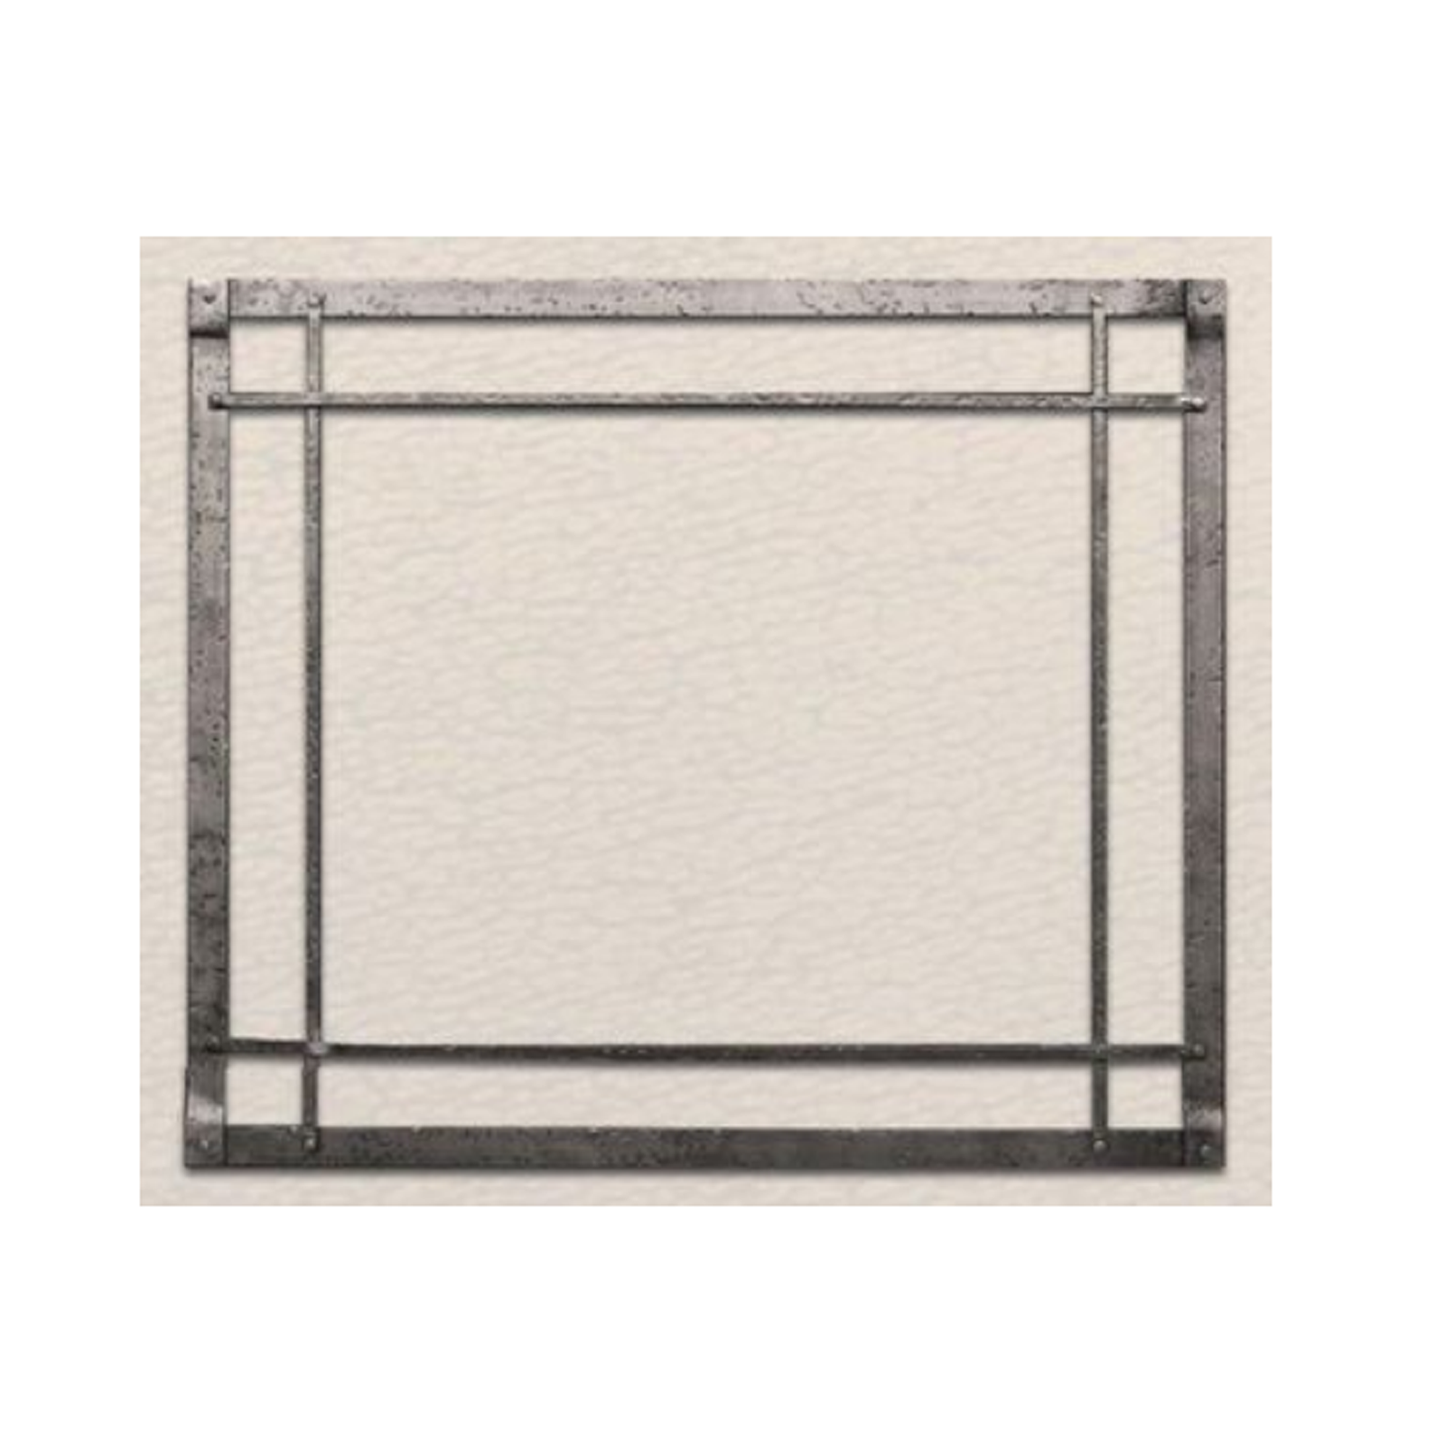 Empire 1.5-in. Oil-Rubbed Bronze Rectangle Frame - DF362XBZT